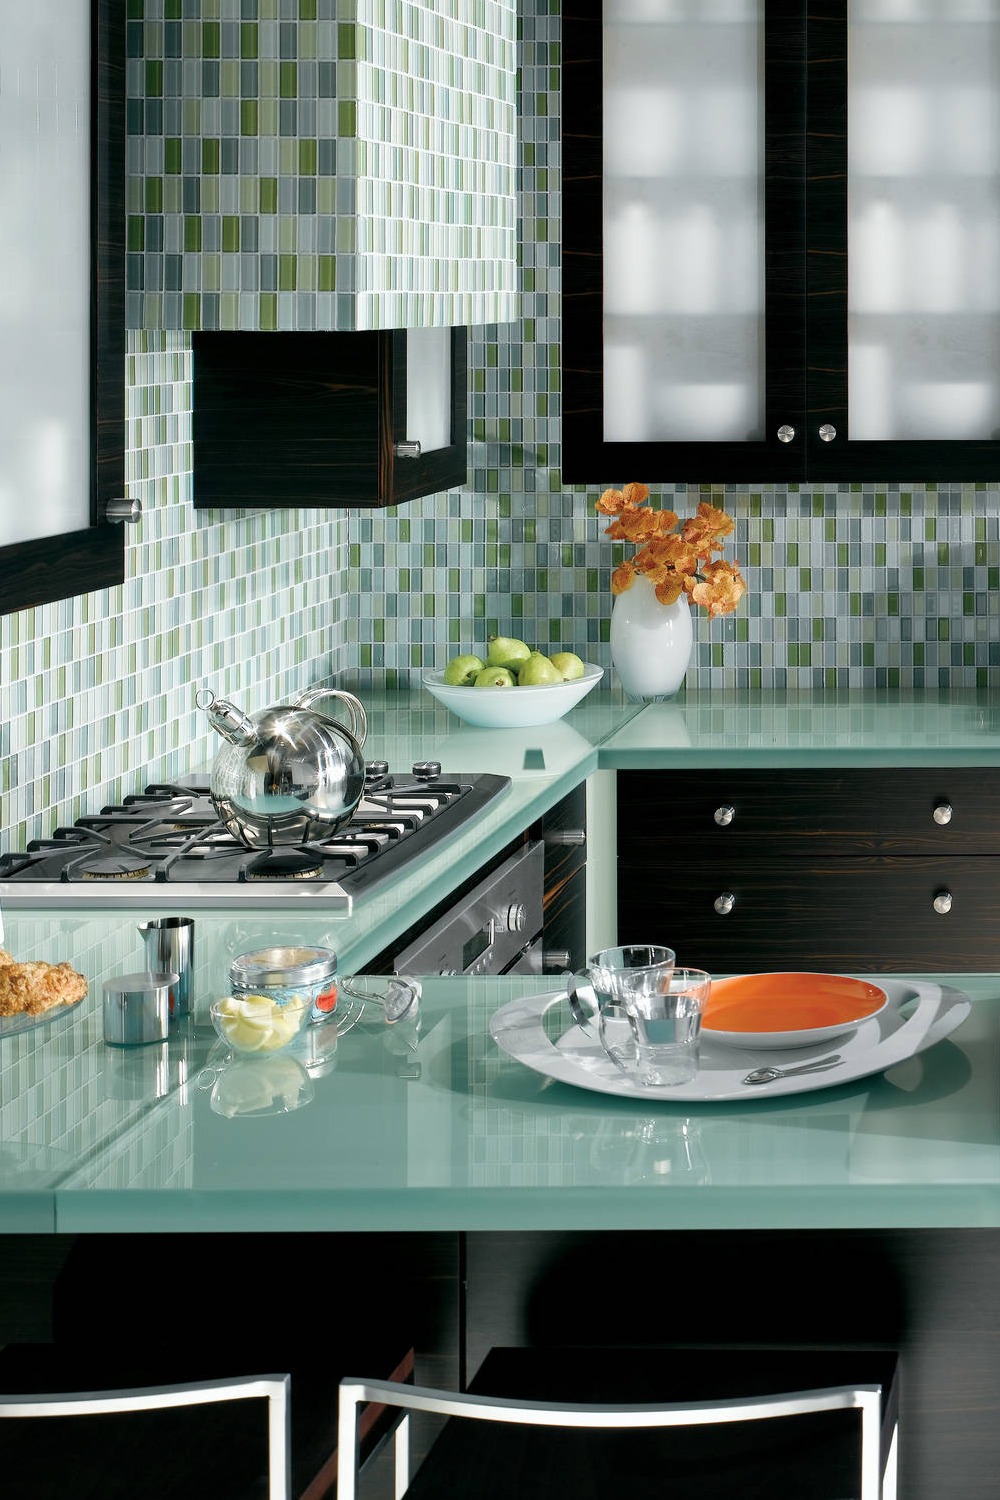 Recycled Glass Countertop Medium Tone Wood Cabinets Recycled Materials Custom Patterns Eco Friendly